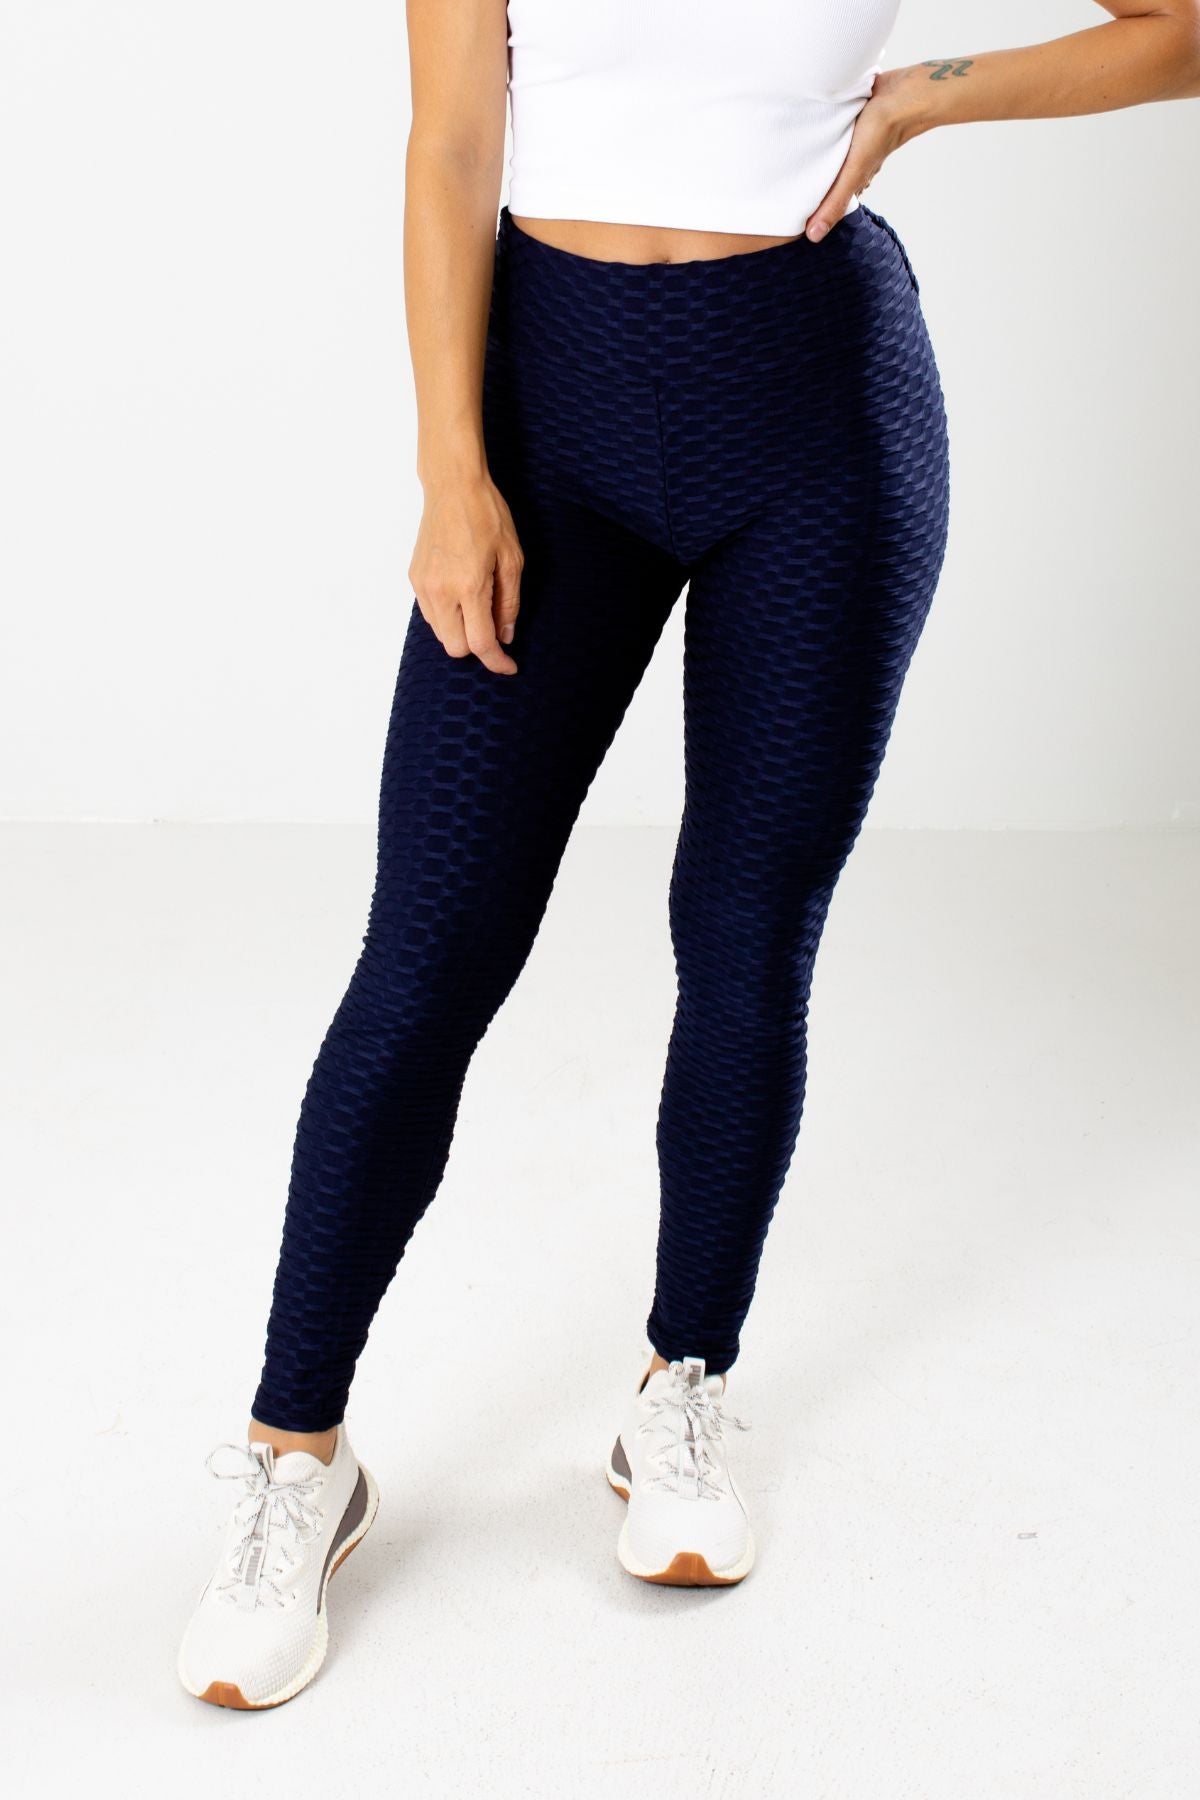 Blue High Quality Boutique Activewear Leggings for Women